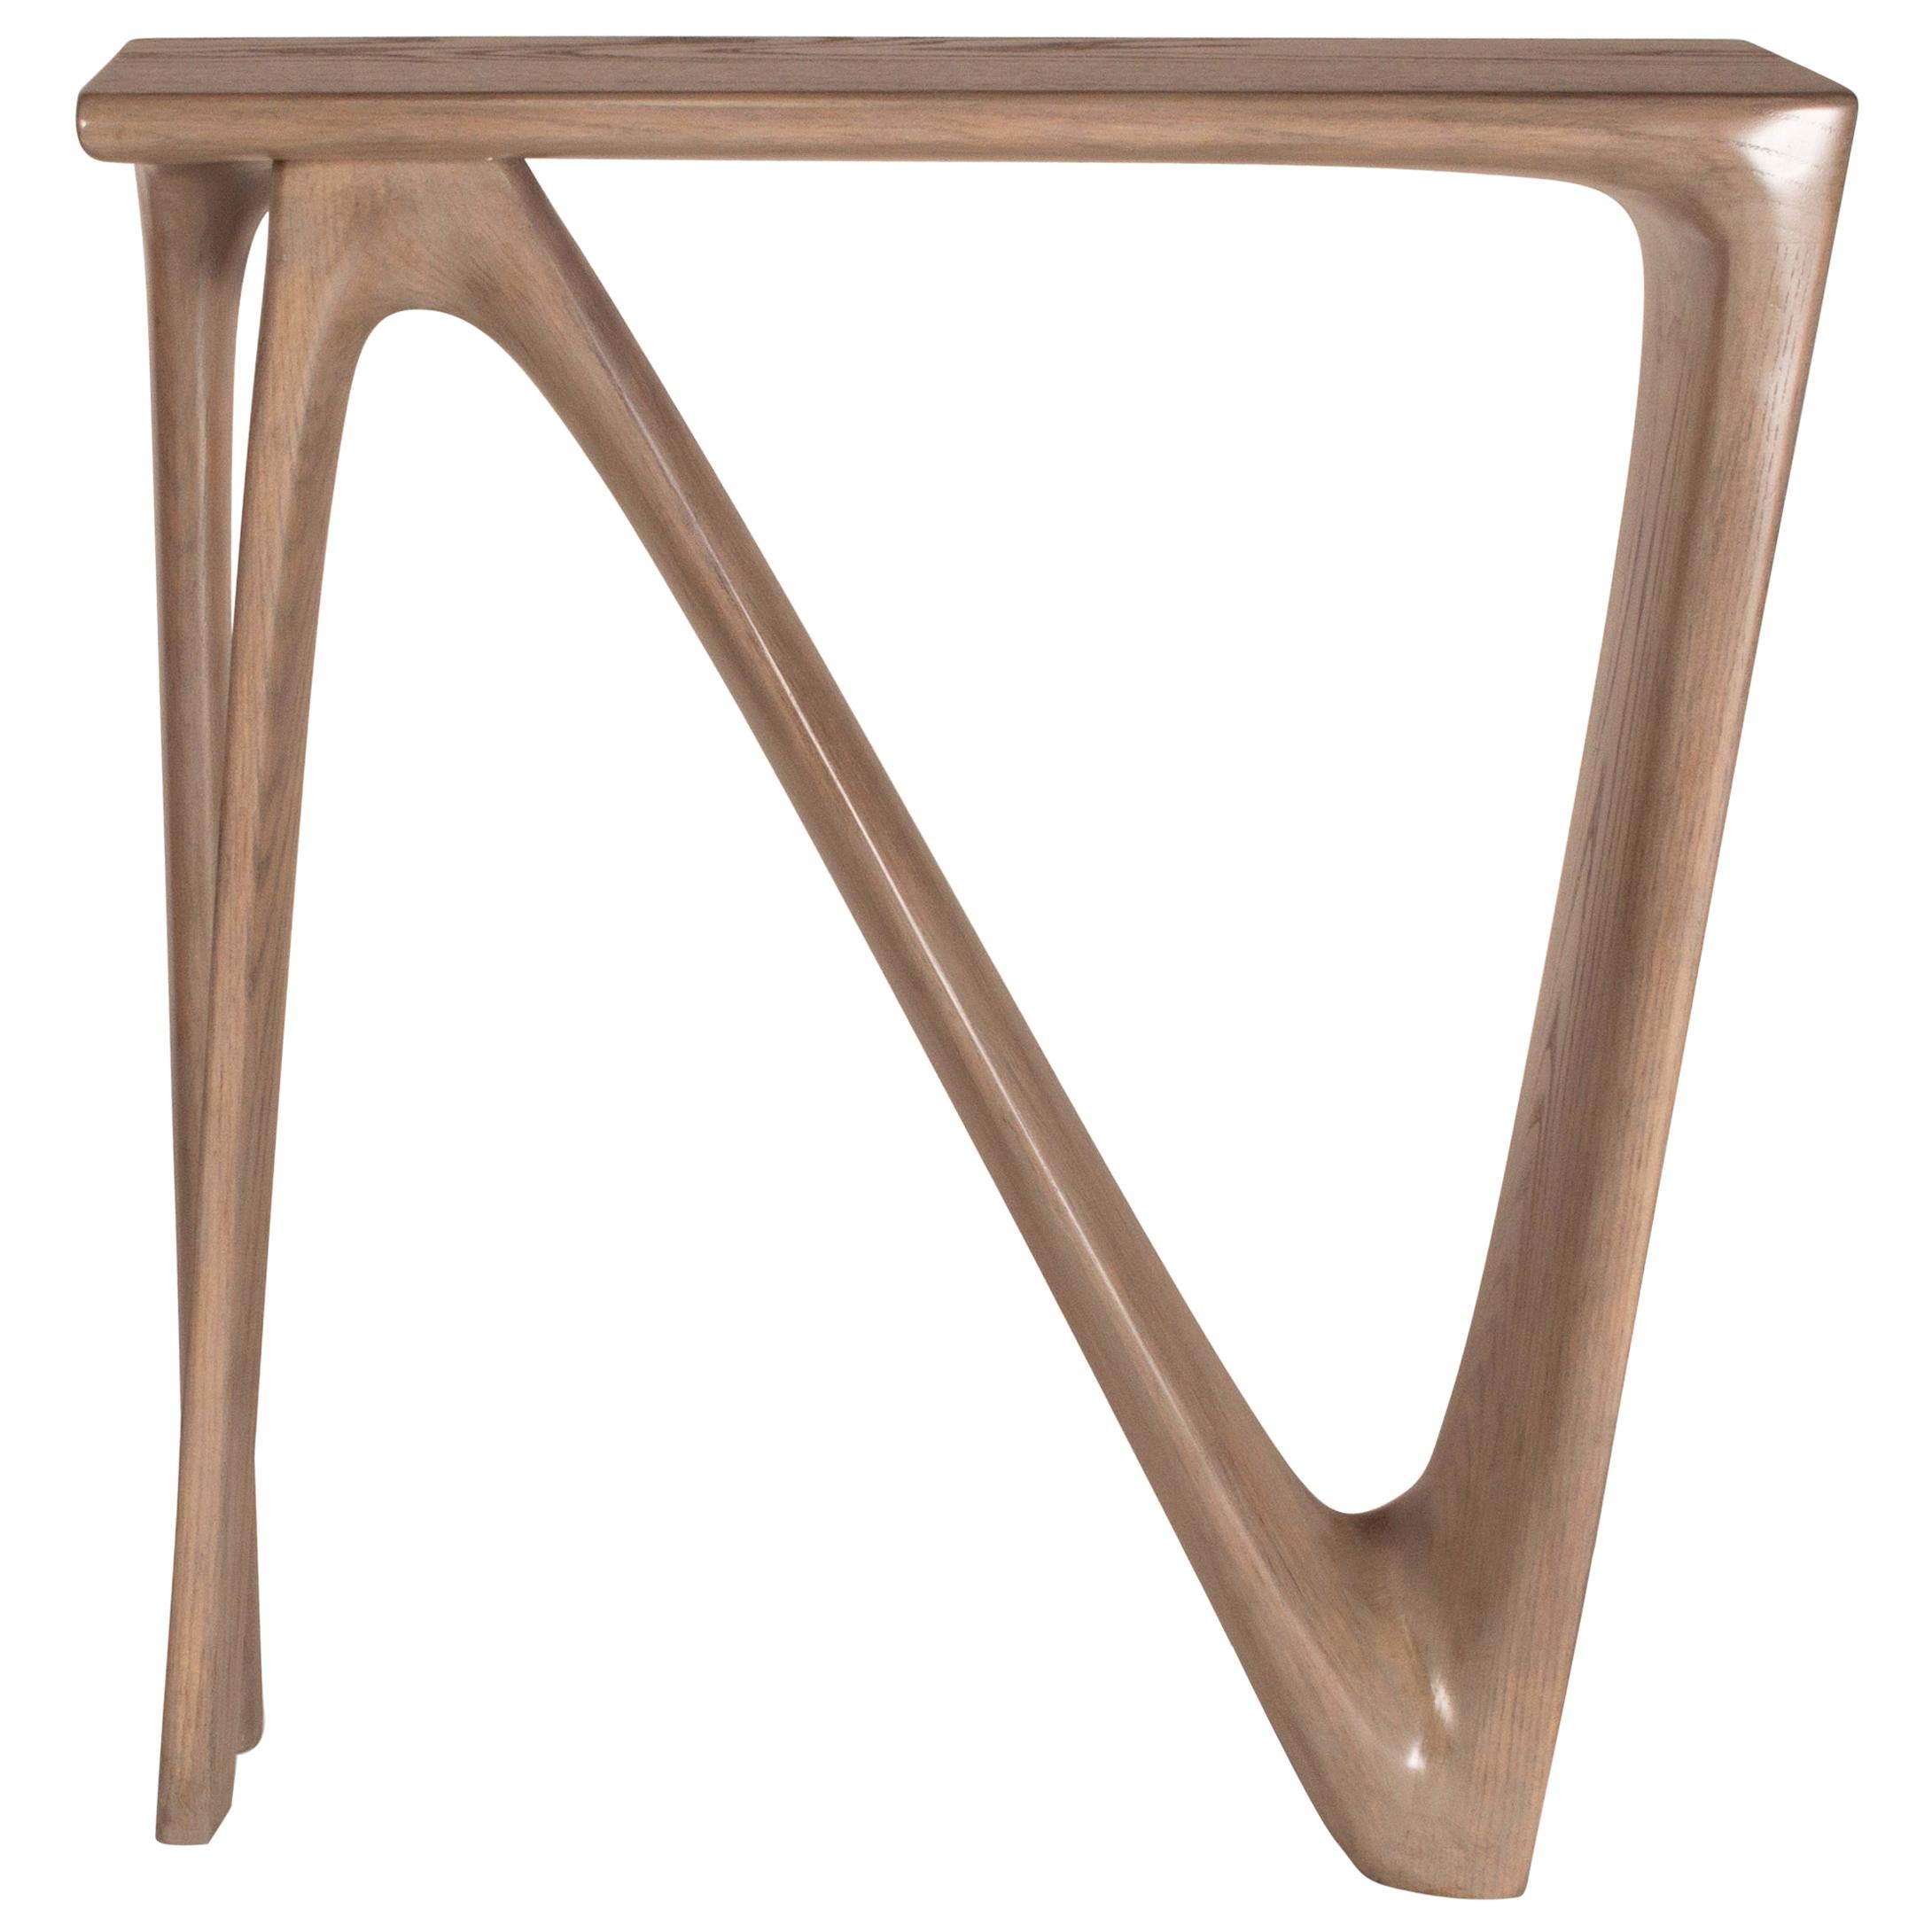 Amorph Astra Console Table Gray Oak Stain on Ash wood For Sale